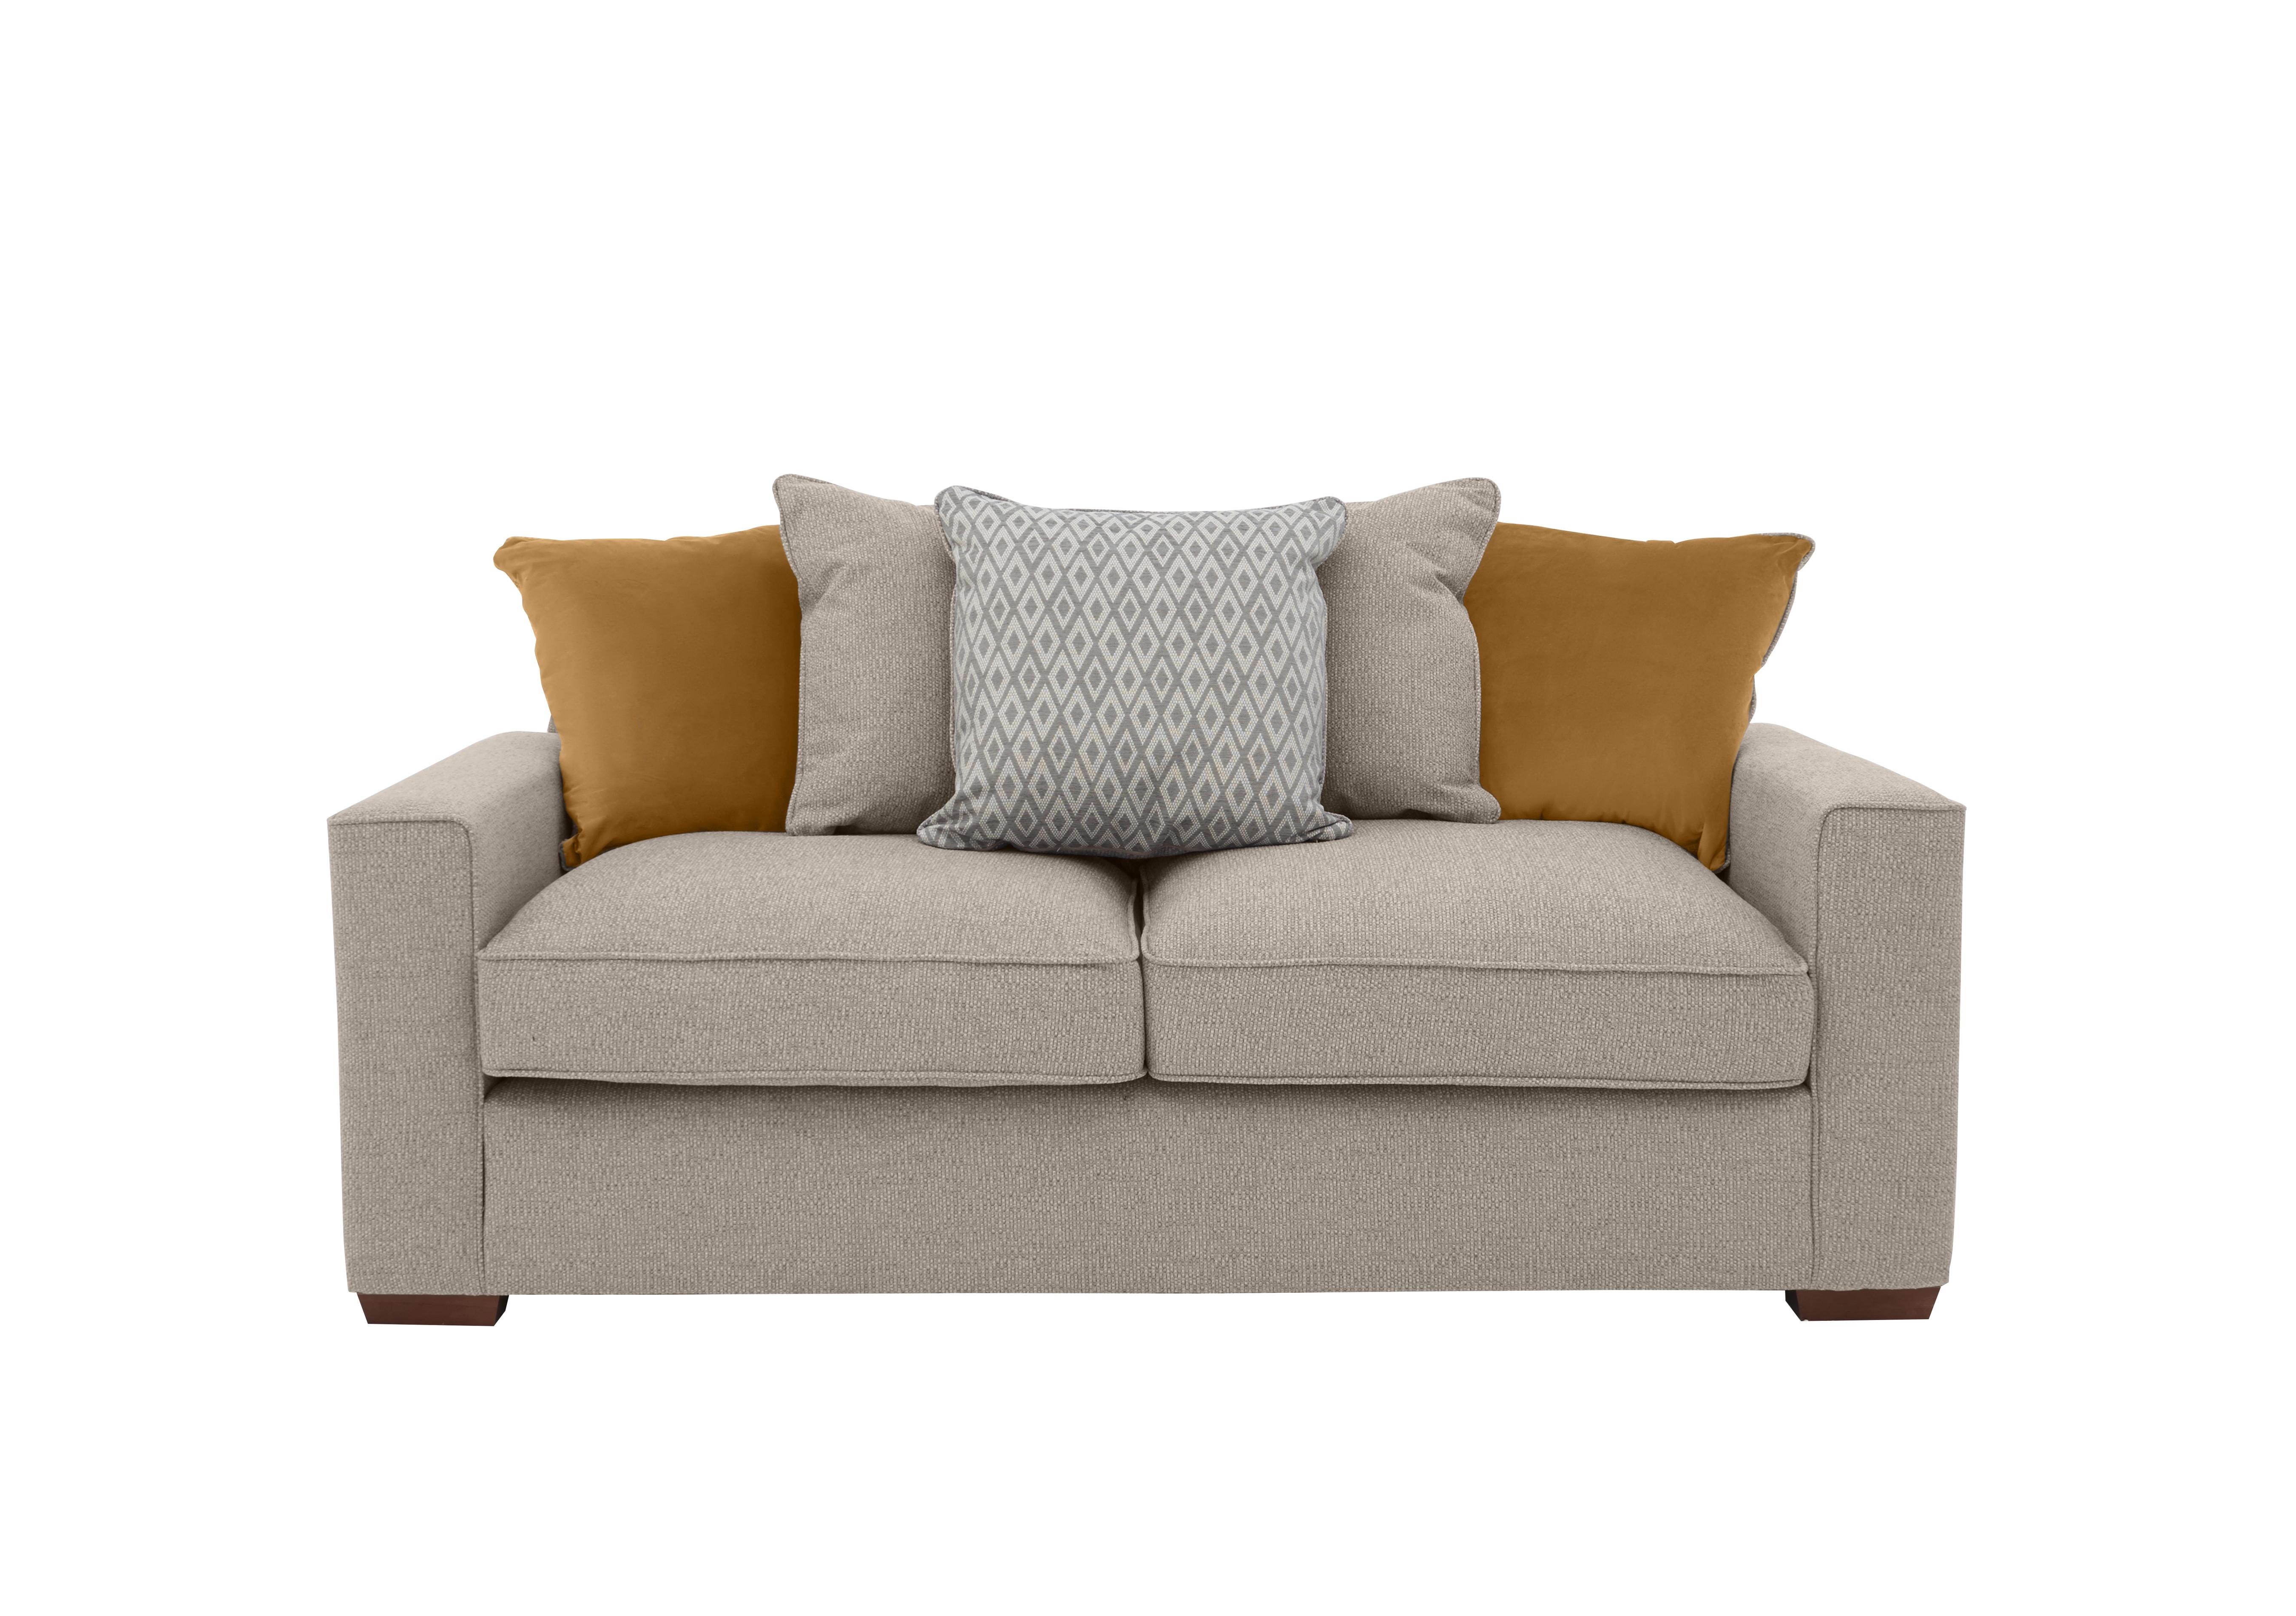 Cory 3 Seater Fabric Scatter Back Sofa in Dallas Natural Mustard Pack on Furniture Village